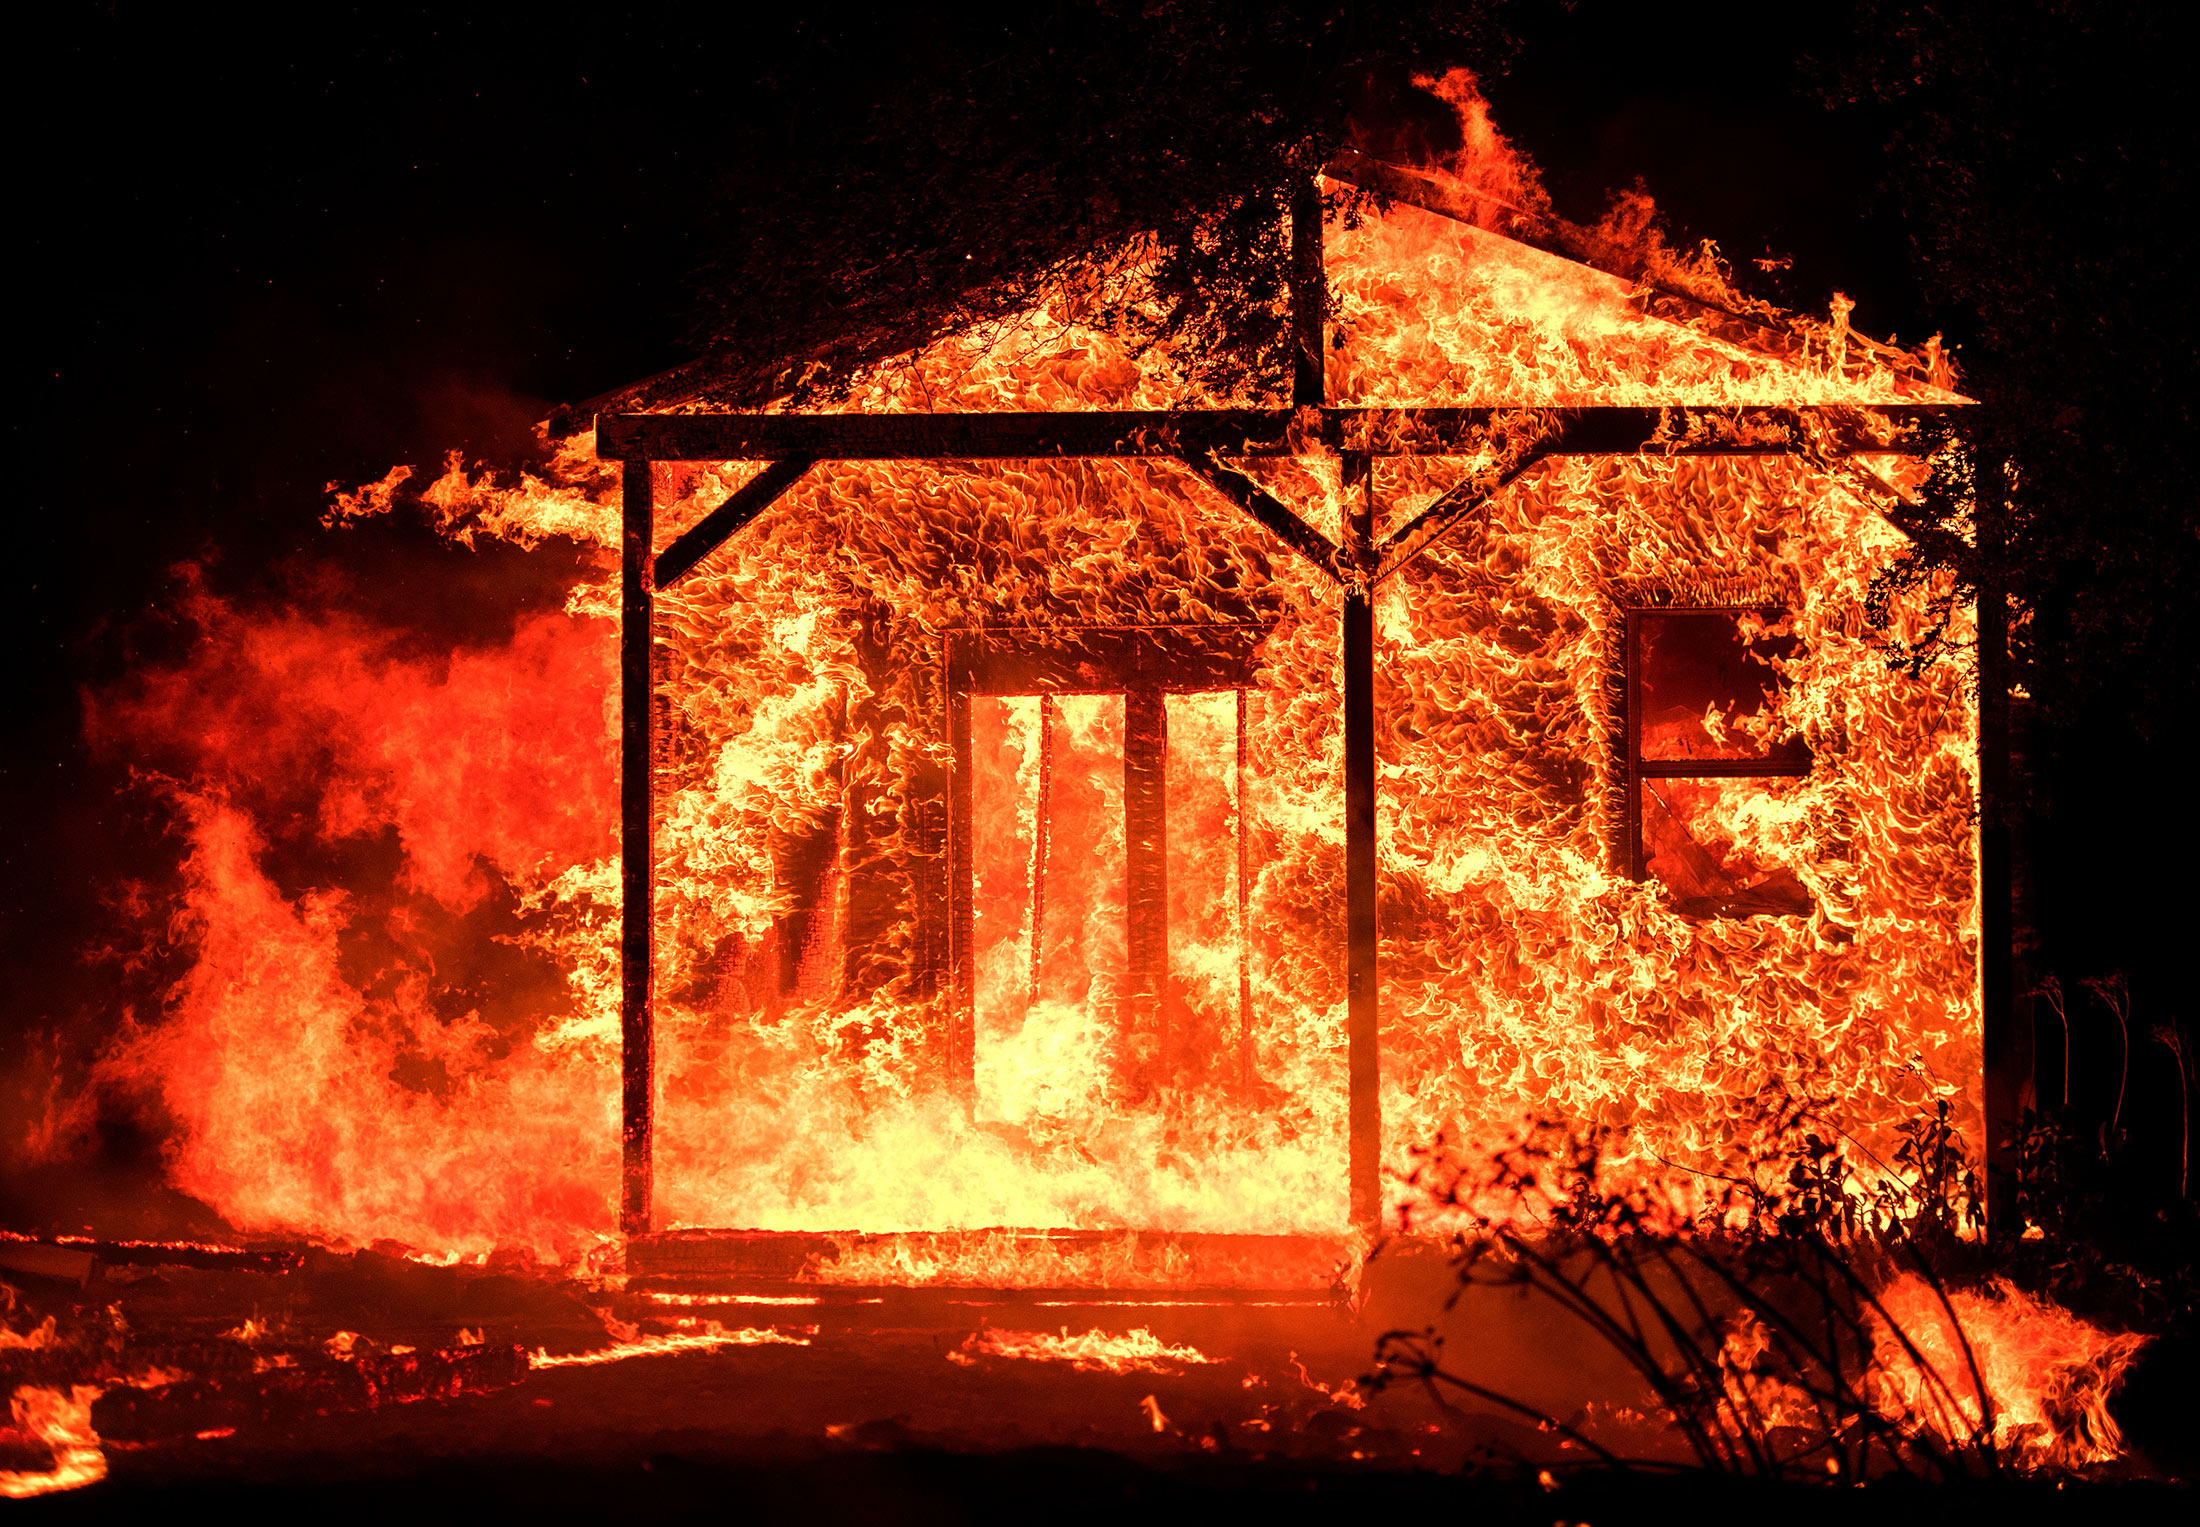 Flames overtake a structure as nearby homes burn in the Napa wine region in California on Oct. 9, 2017, as multiple wind-driven fires continue to whip through the region.
